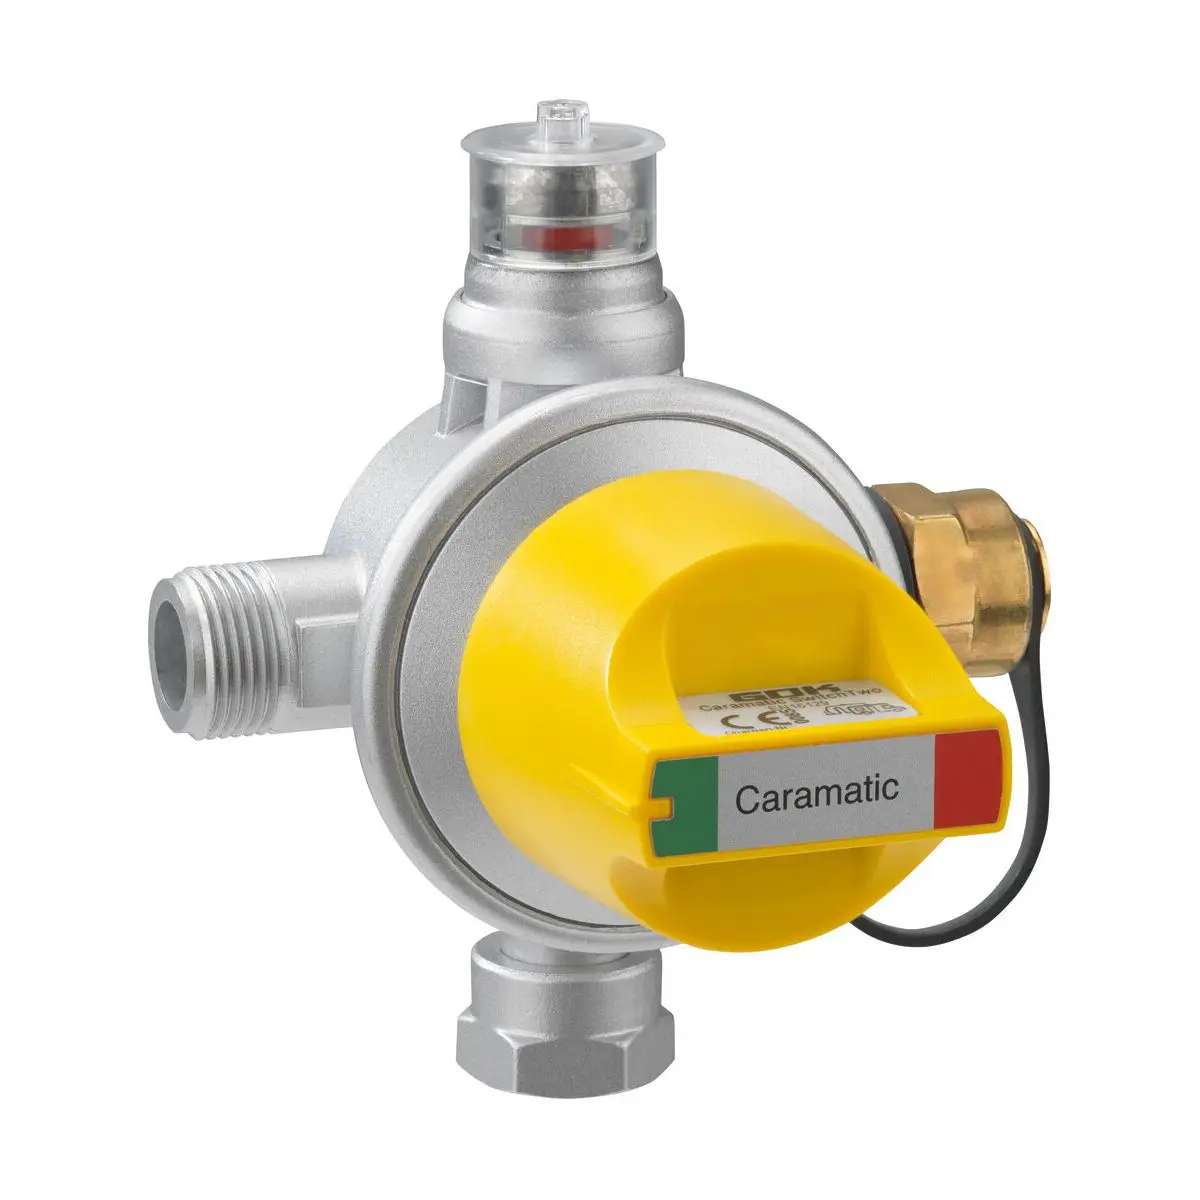 Caramatic SwitchTwo - 1,5 kg/h